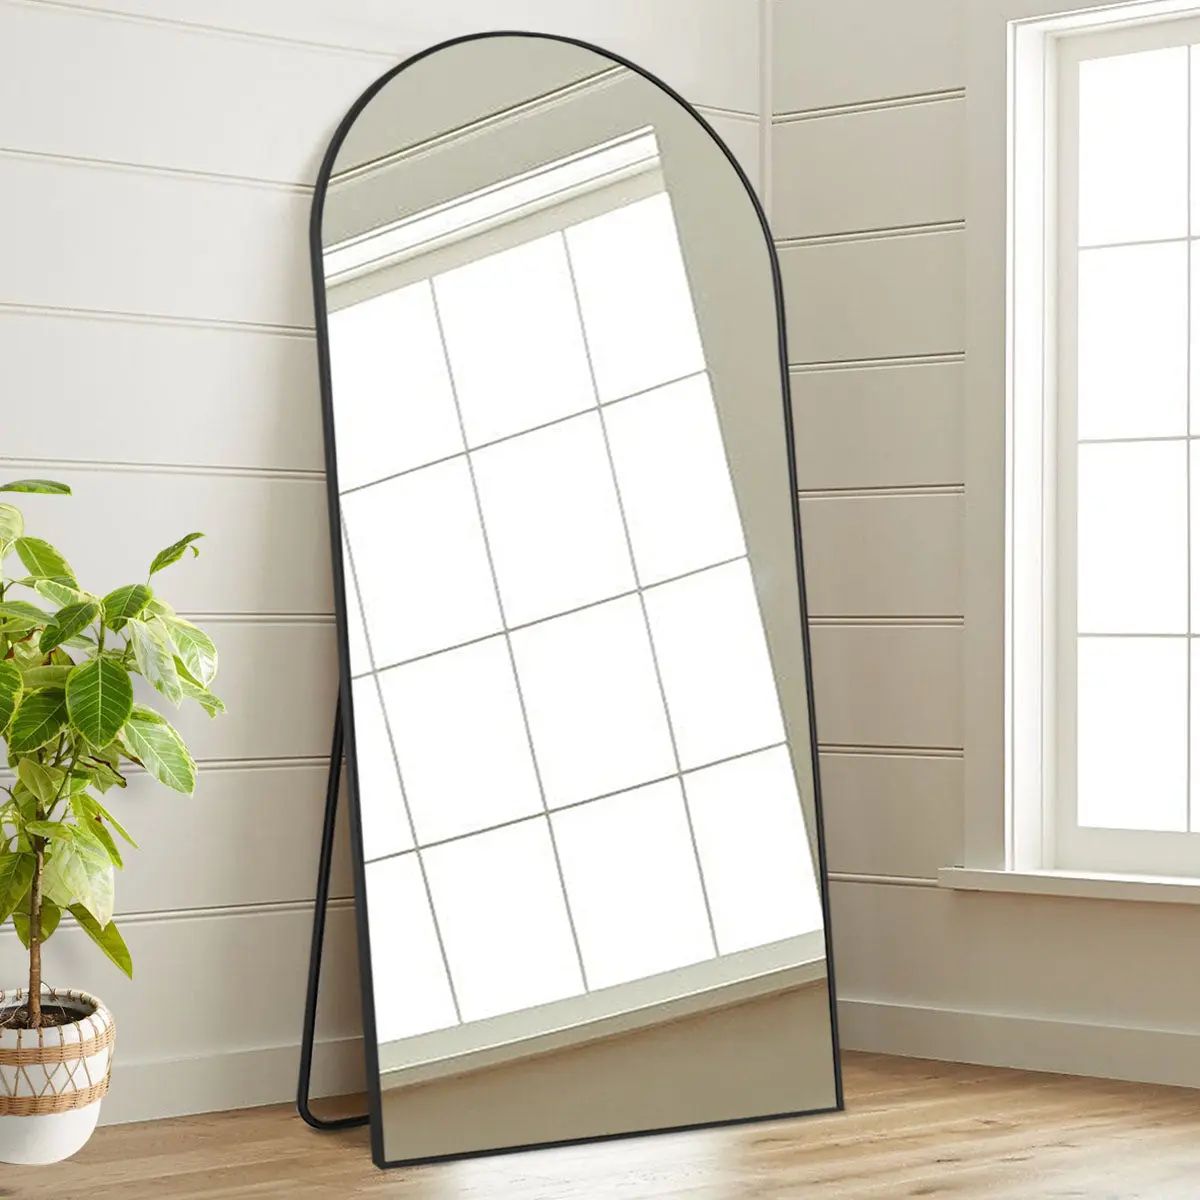 Muse Large Arch Mirror Full Length 71“X32” Arched Mirror | The Pop Maison